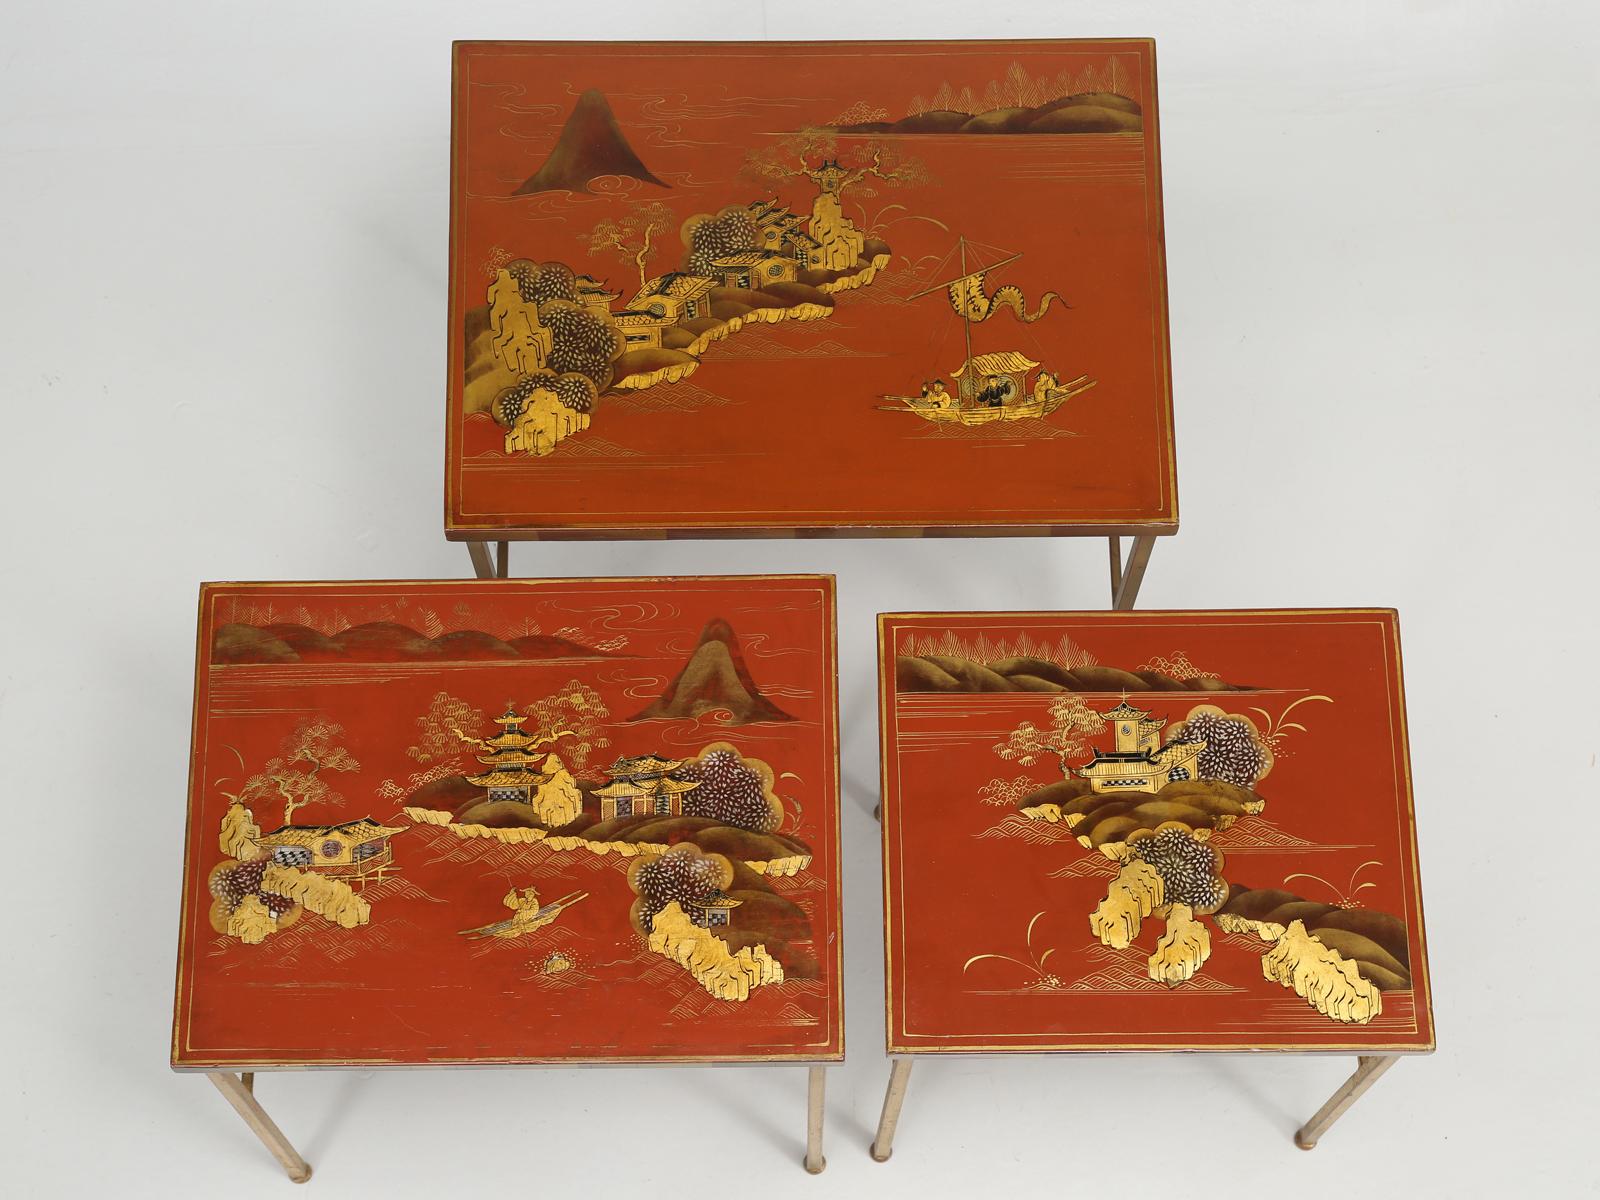 French Maison Jansen 'Attributed' Set of Three Stacking Tables Lacquered Chinese Scenes